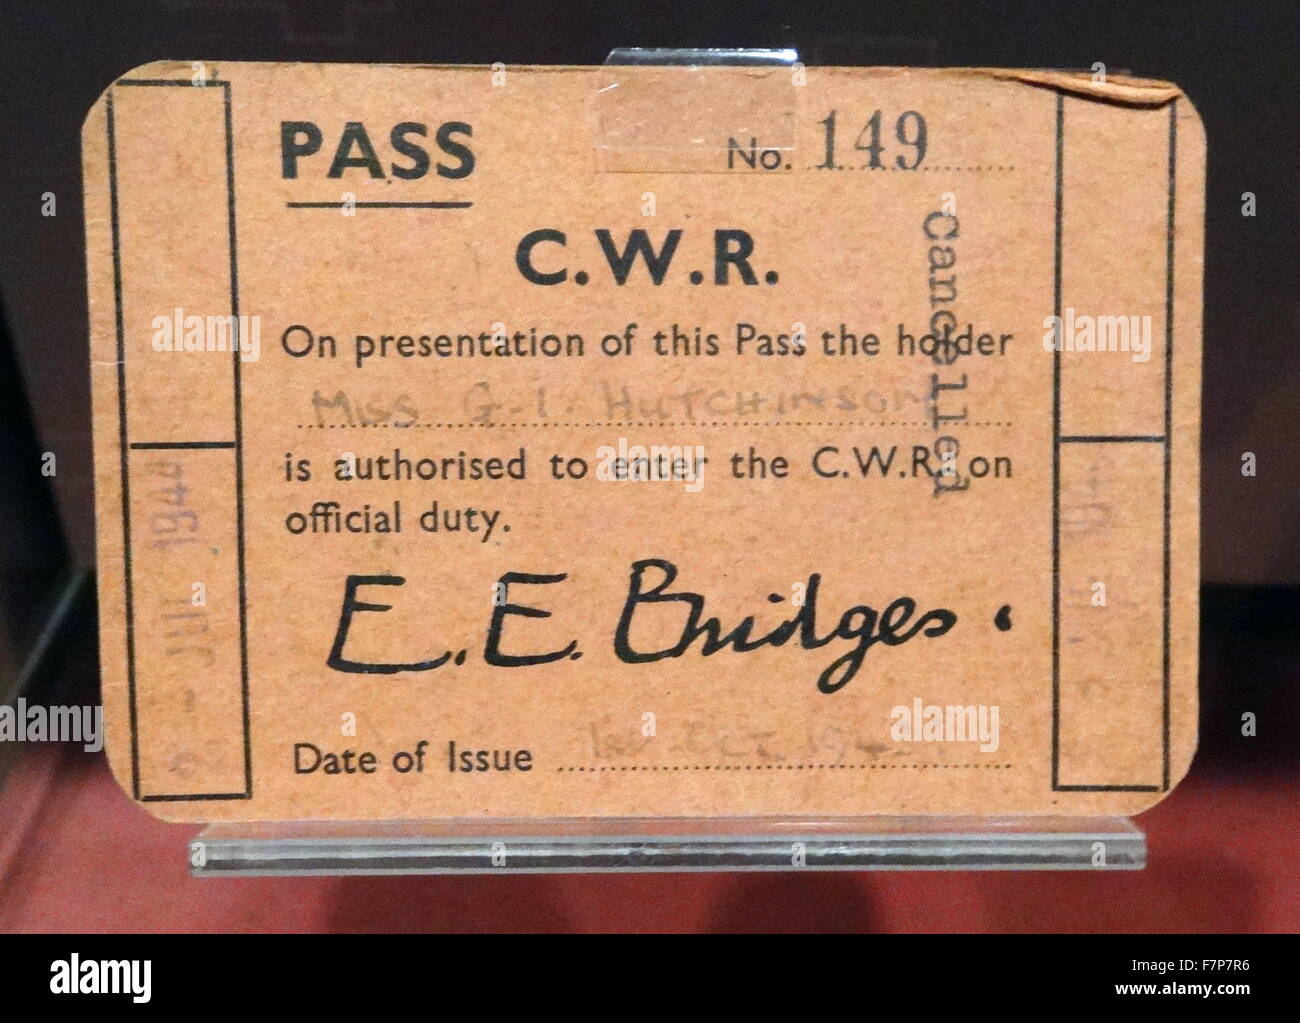 Identity document used as a pass by staff and officials in the Cabinet war rooms bunker, London; England. The War rooms were used by the British Government as protection for senior ministers during World war two. Stock Photo